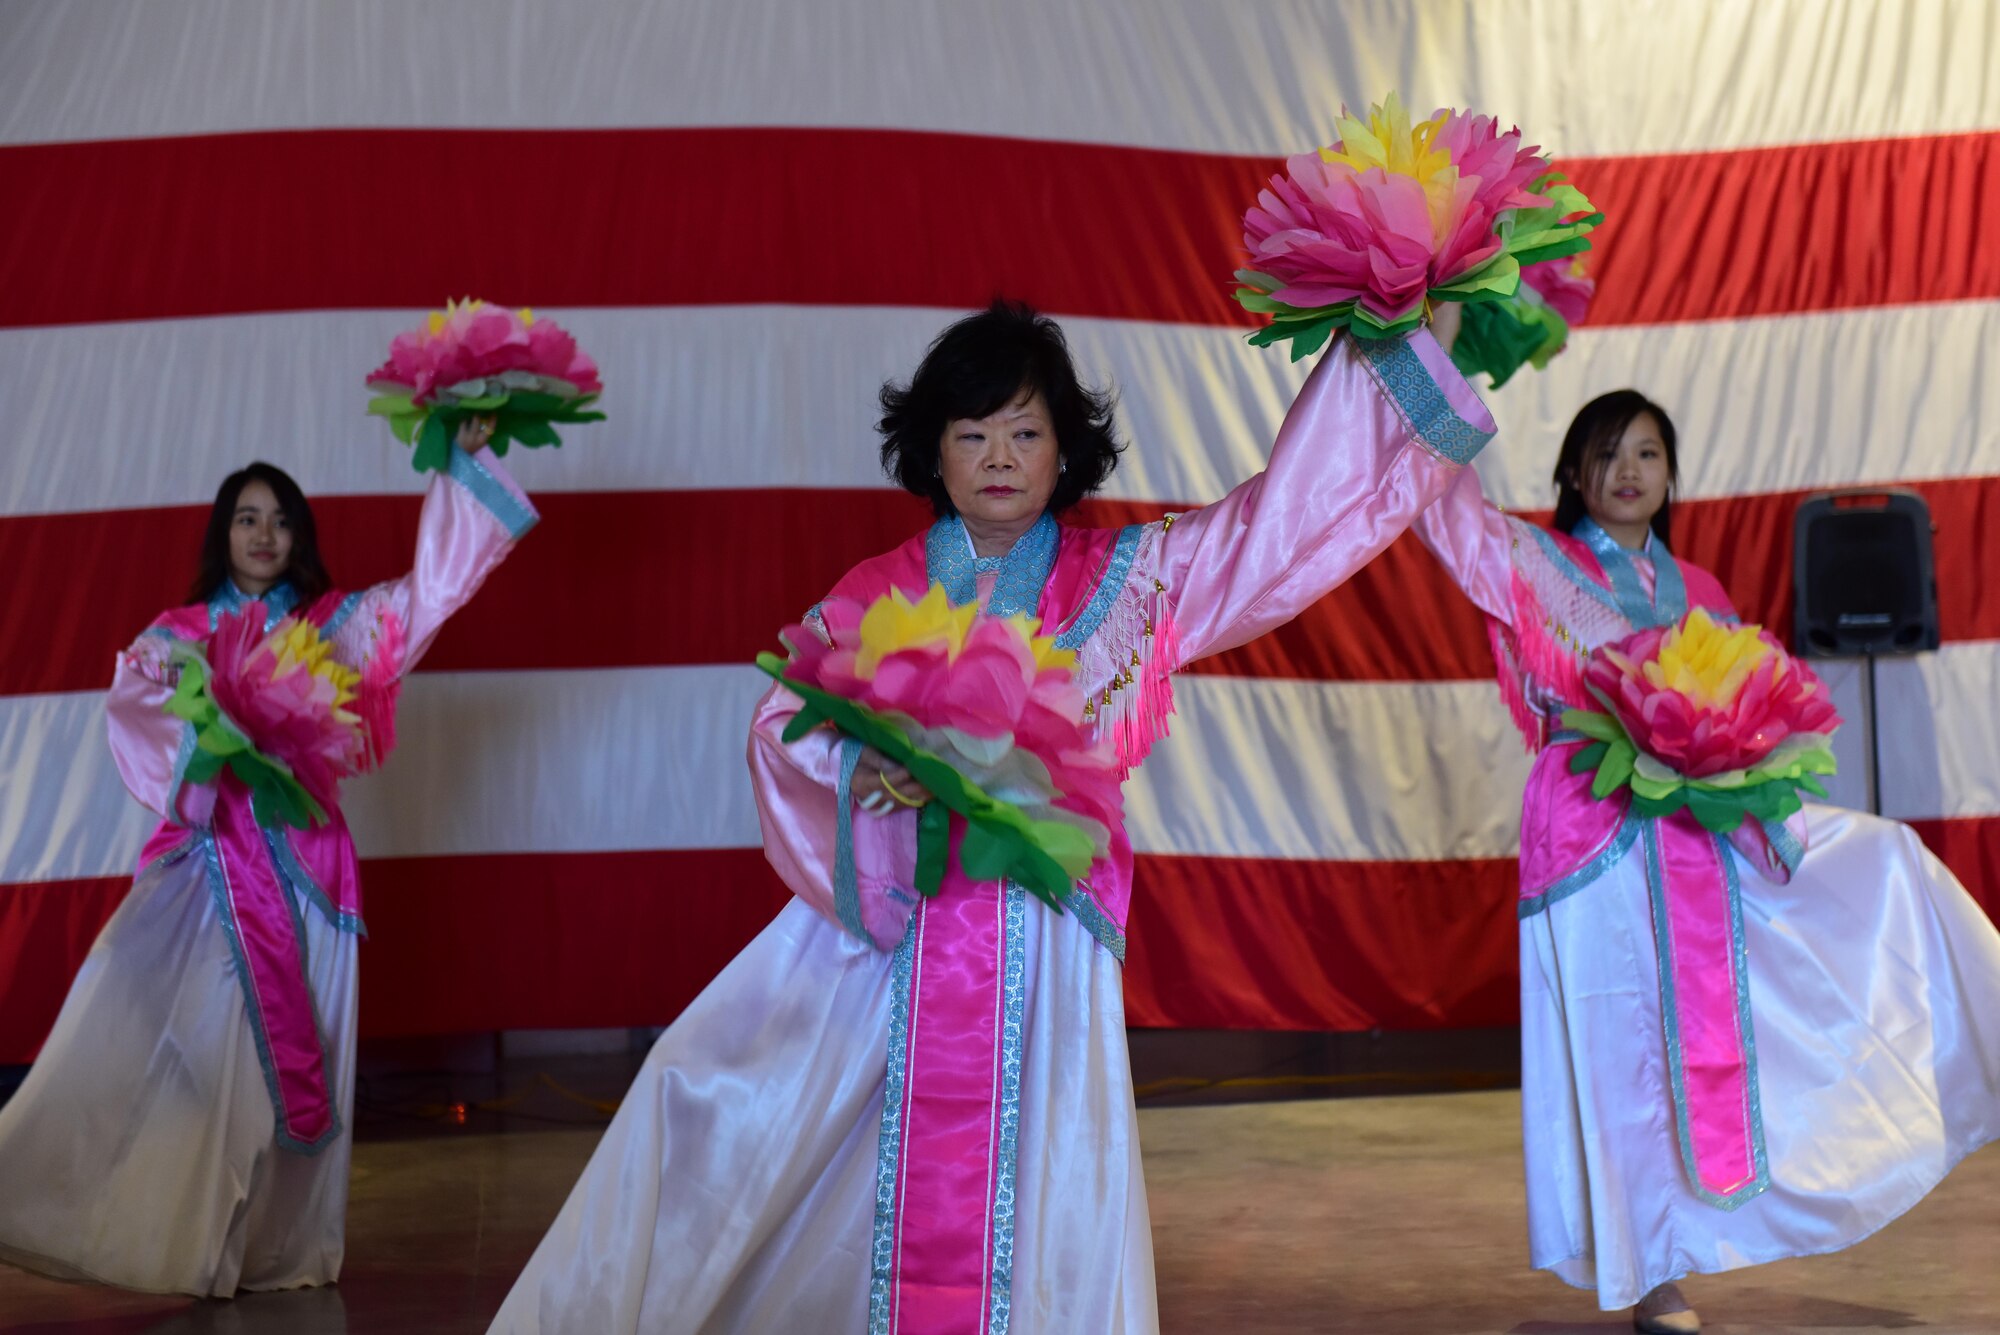 The Asian Pacific American Heritage Association hosted a capstone event to close out the Asian American Pacific Islander Heritage Month at Whiteman Air Force Base, Mo., May 25, 2017. The event included various food tastings, jiujitsu and dance demonstra­tions, and a static cultural display. 